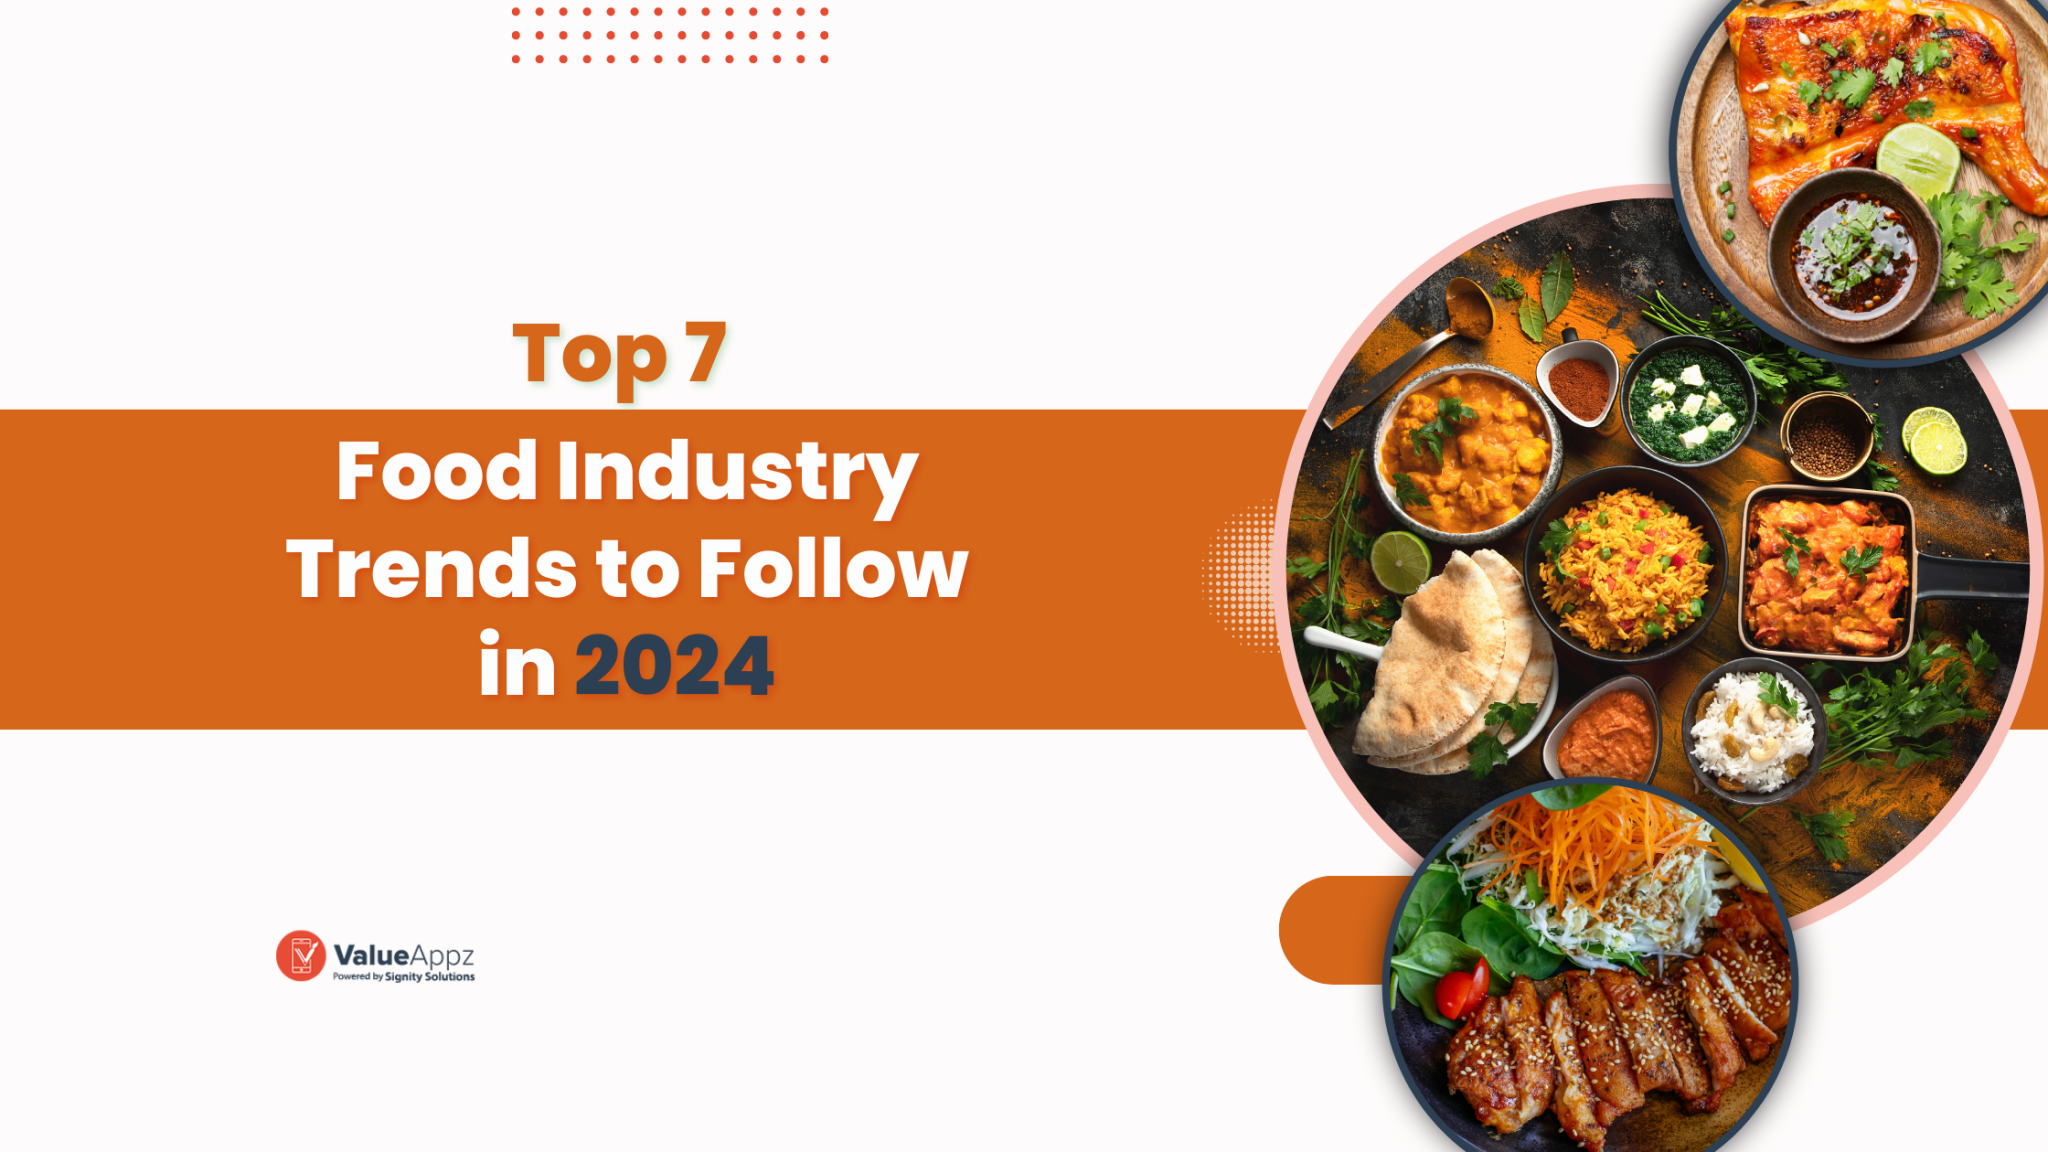 Top 7 Food Industry Trends to Follow in 2024